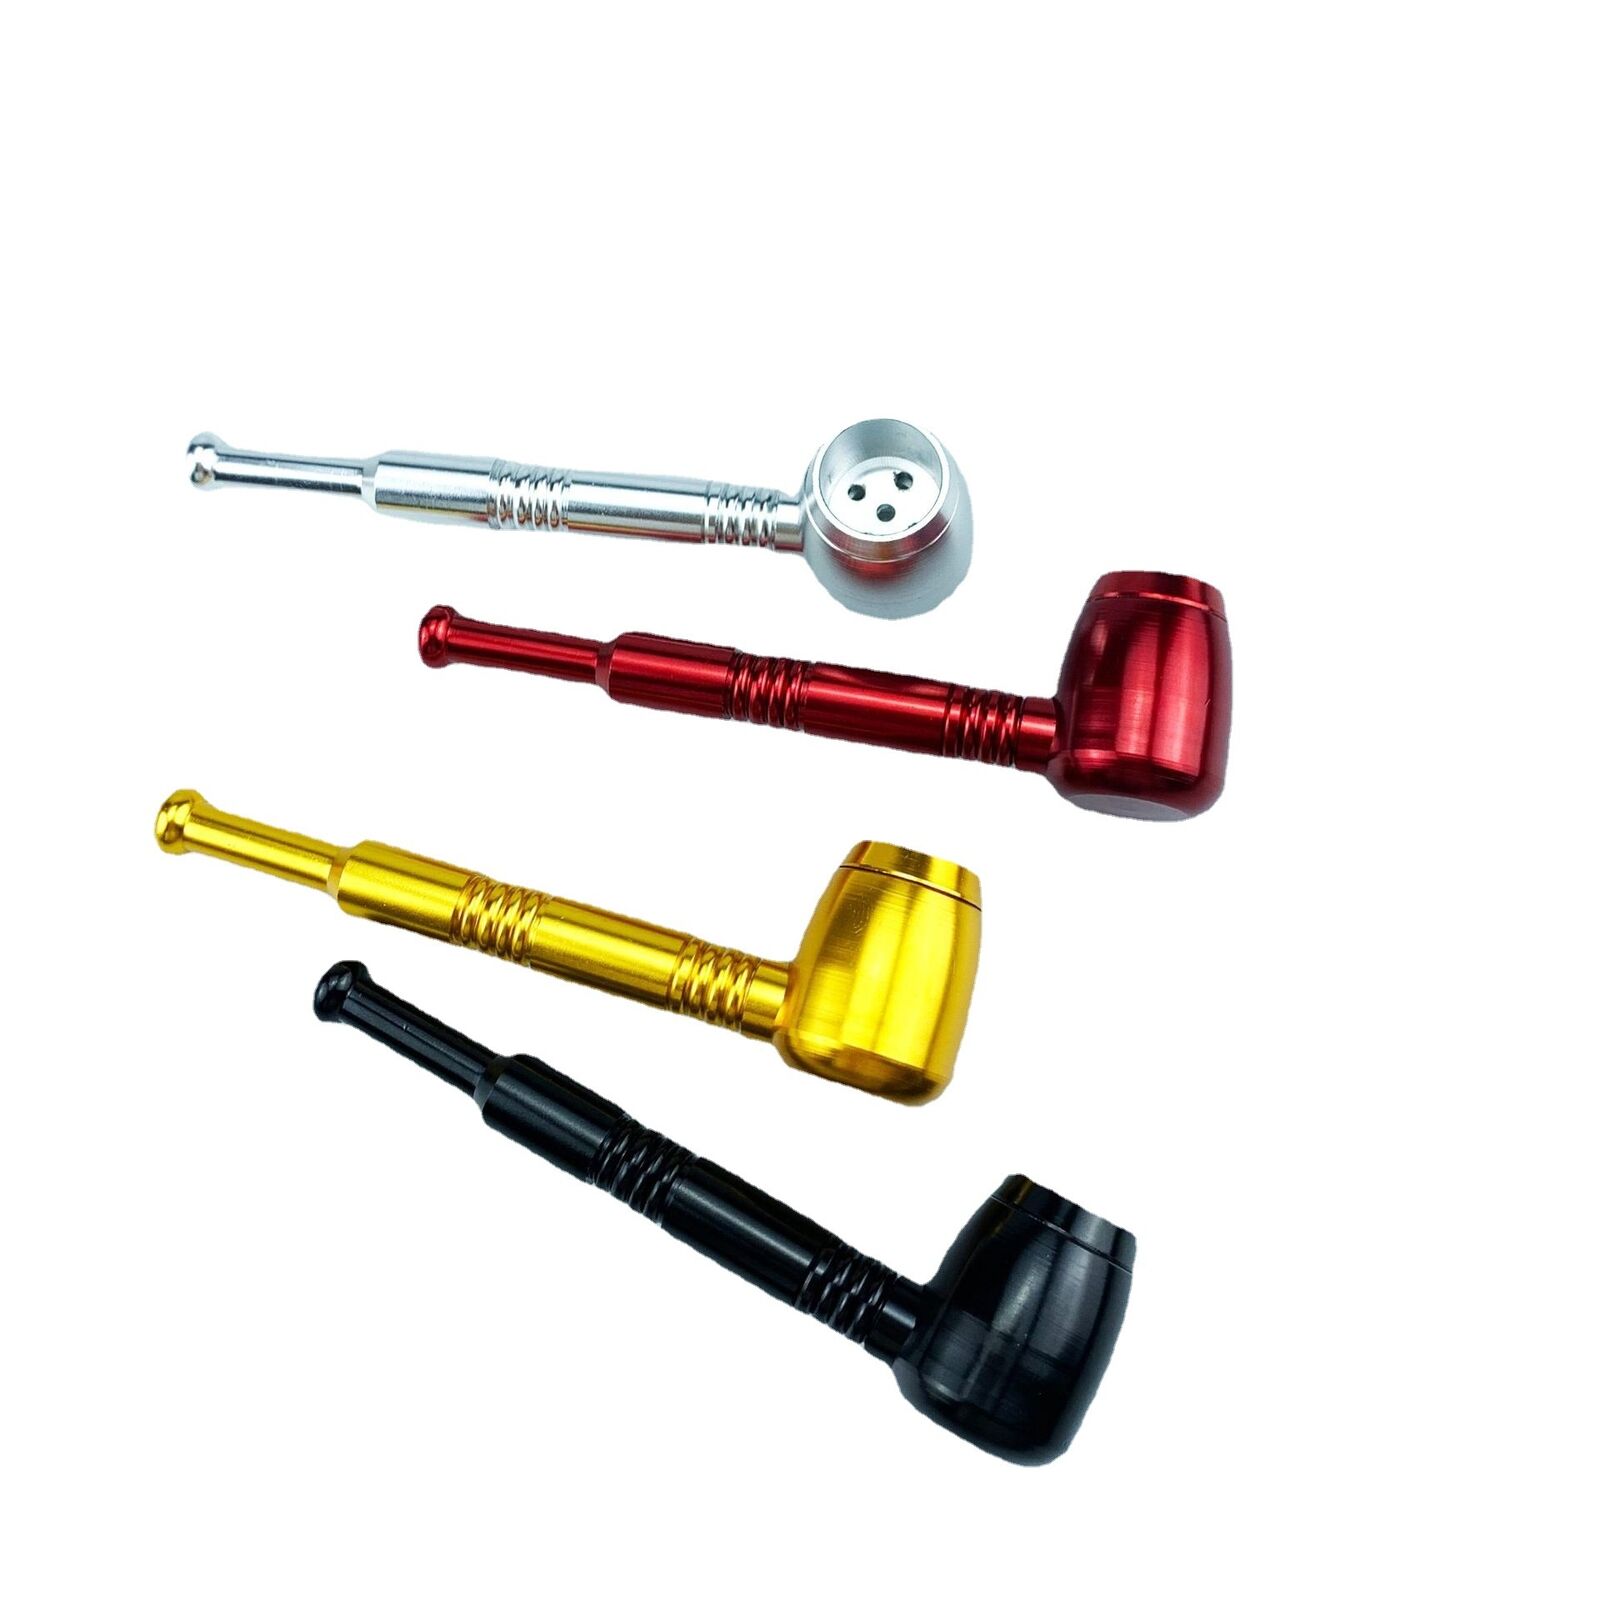 Creative Metal Pipe Portable Detachable Cleaning Metal Tobacco Cigarette Pipe